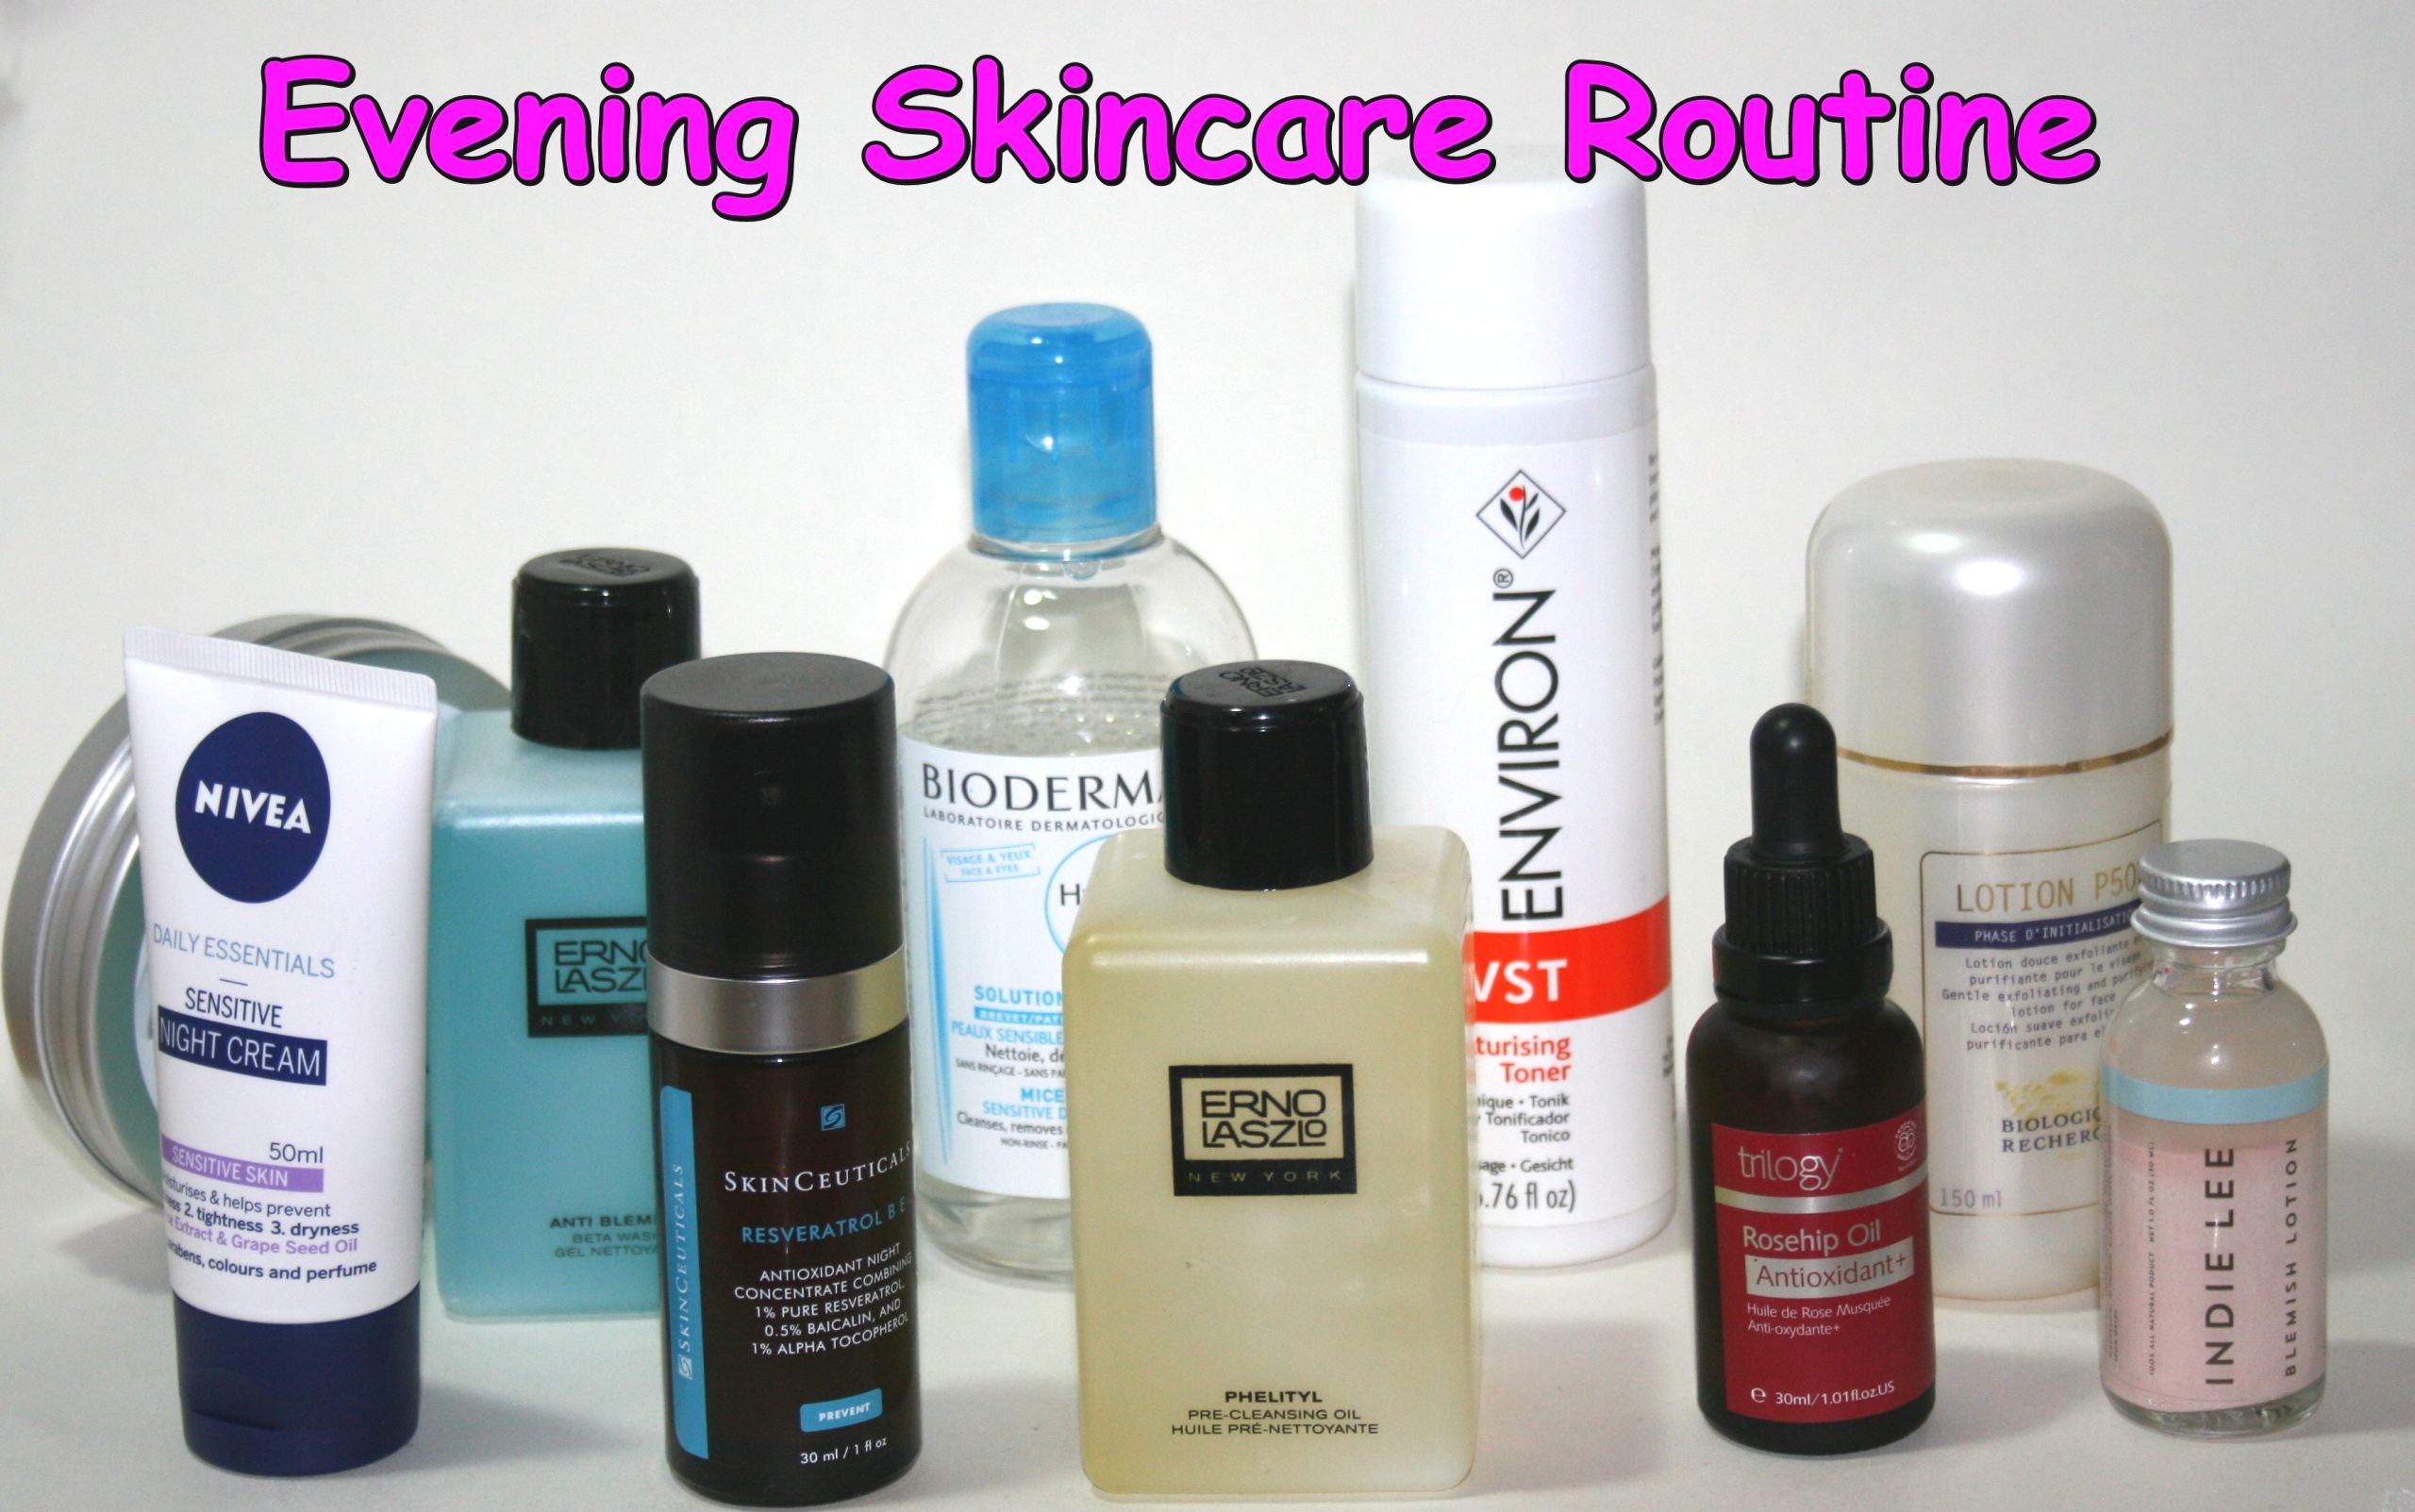 Evening Skincare Routine (July 2014)